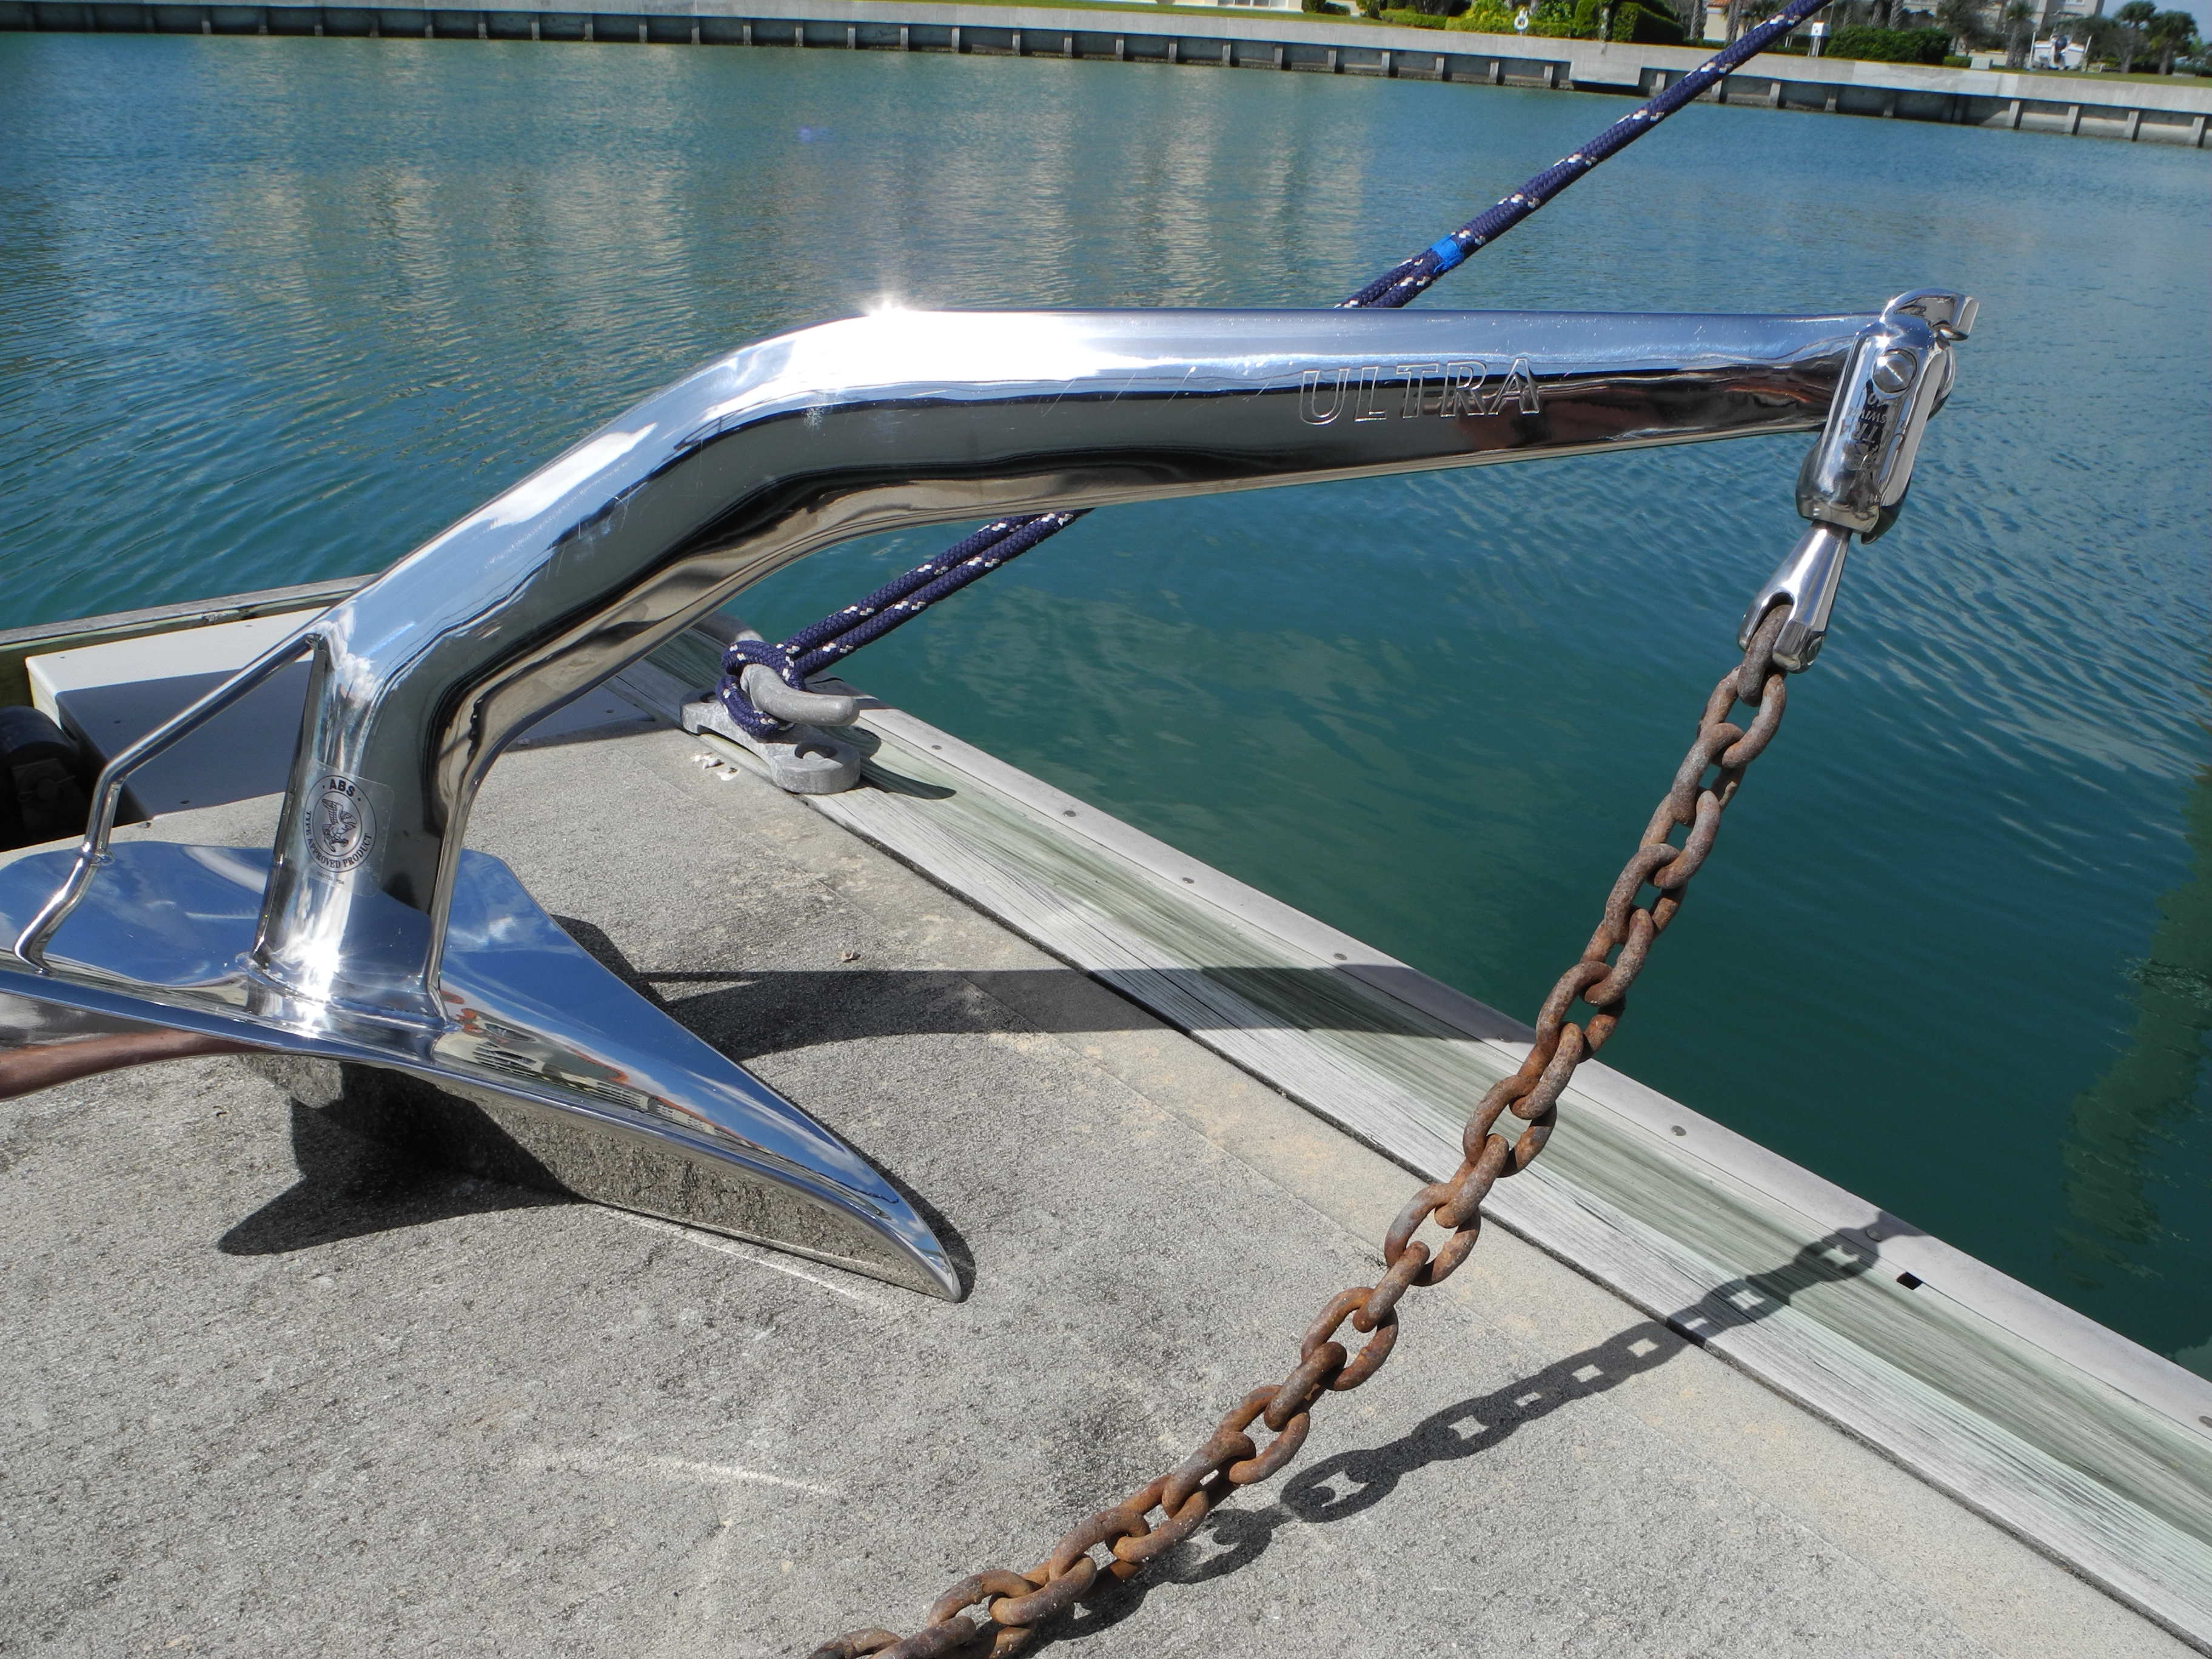 Measure your Anchor Chain with Red, White & Blue. Ask Captain Chris